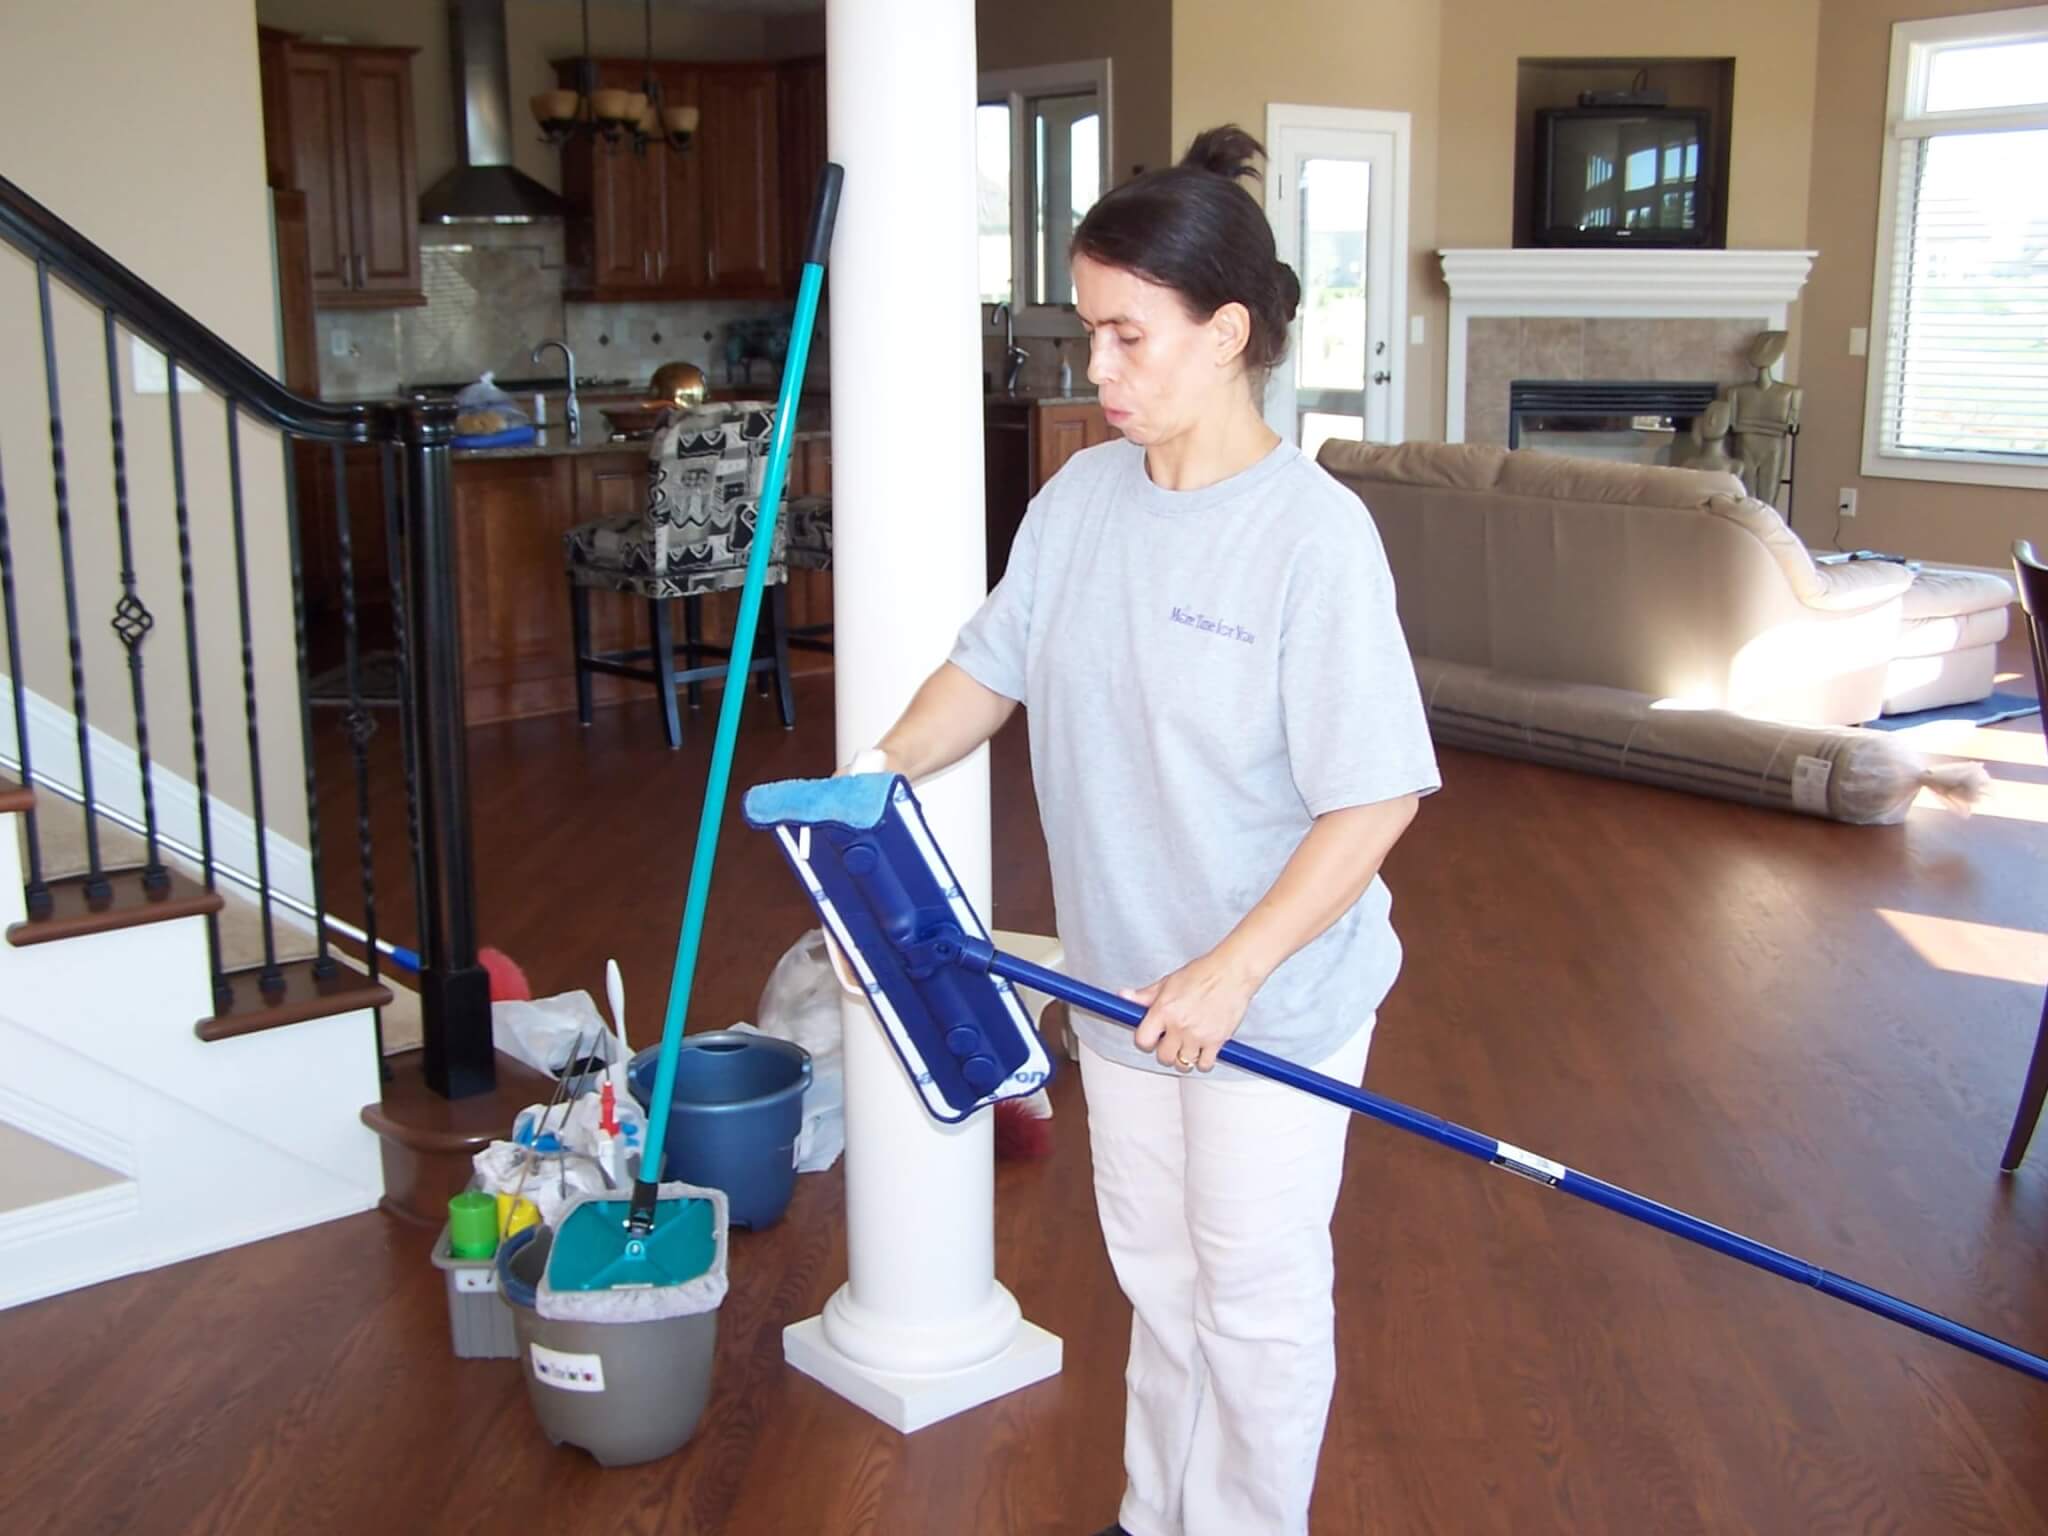 Housekeeping and domestic cleaning jobs are not easy at all